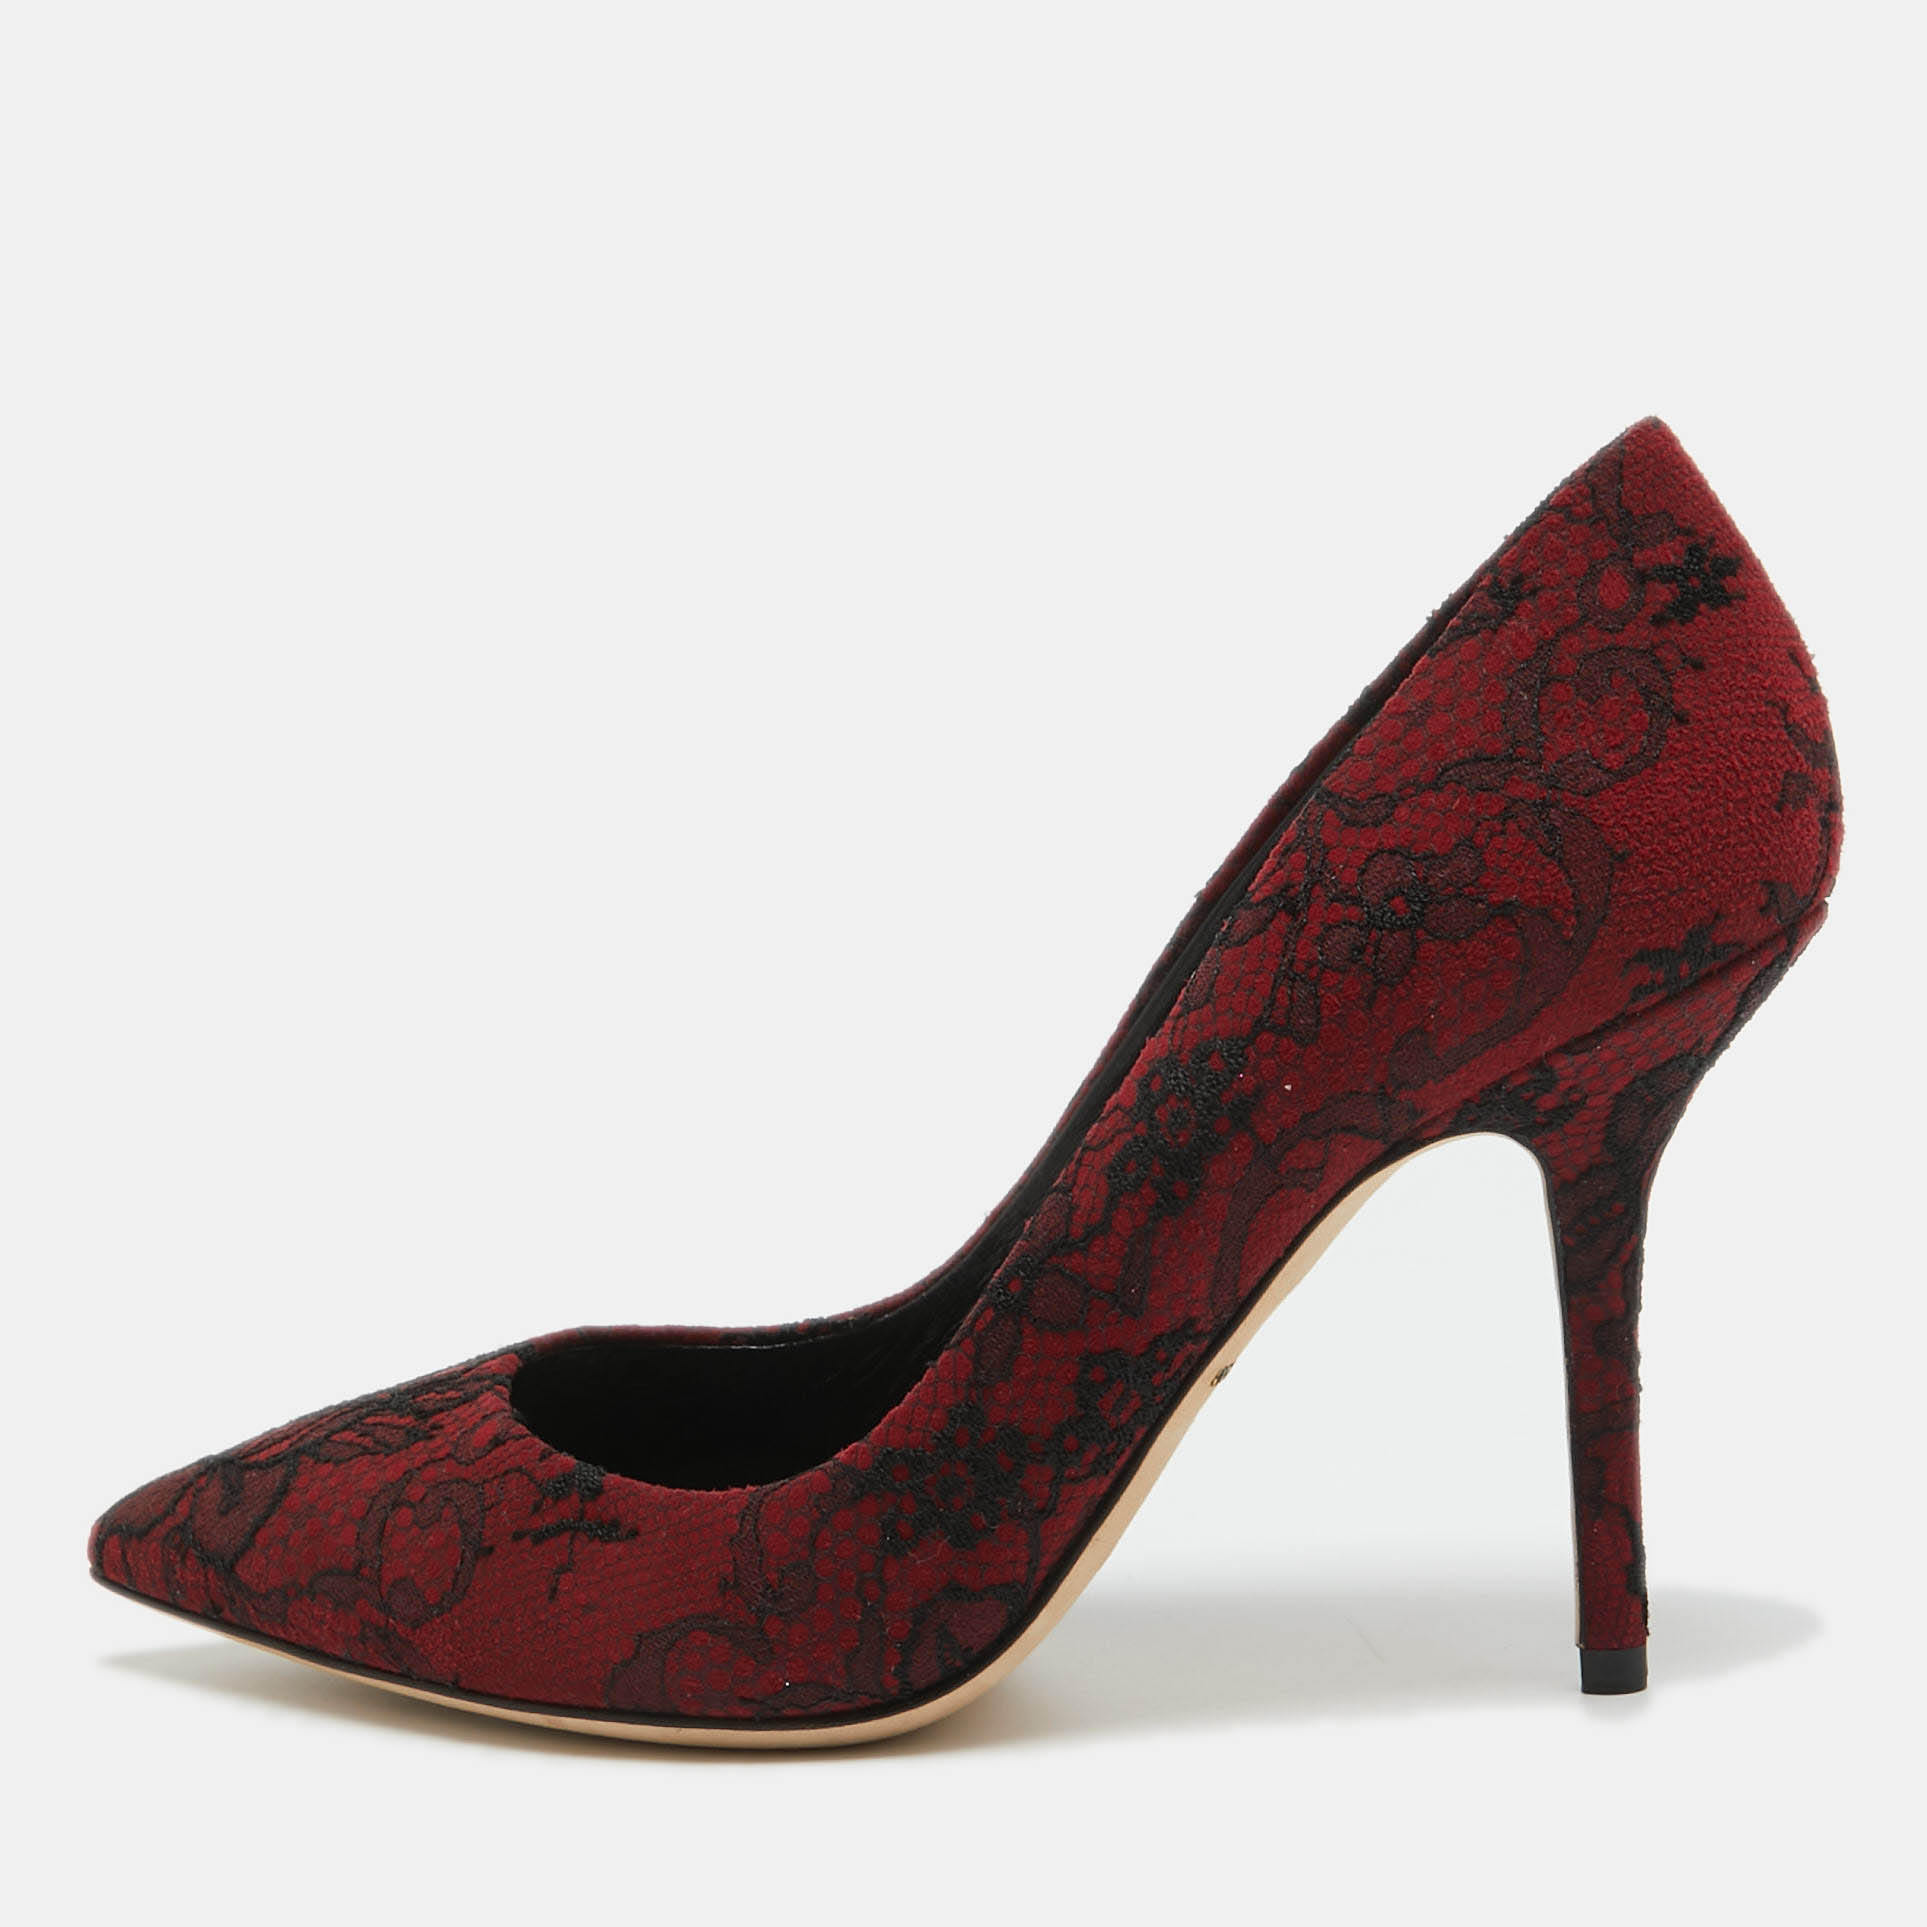 Dolce & gabbana black/dark red lace and suede pointed toe pumps size 37